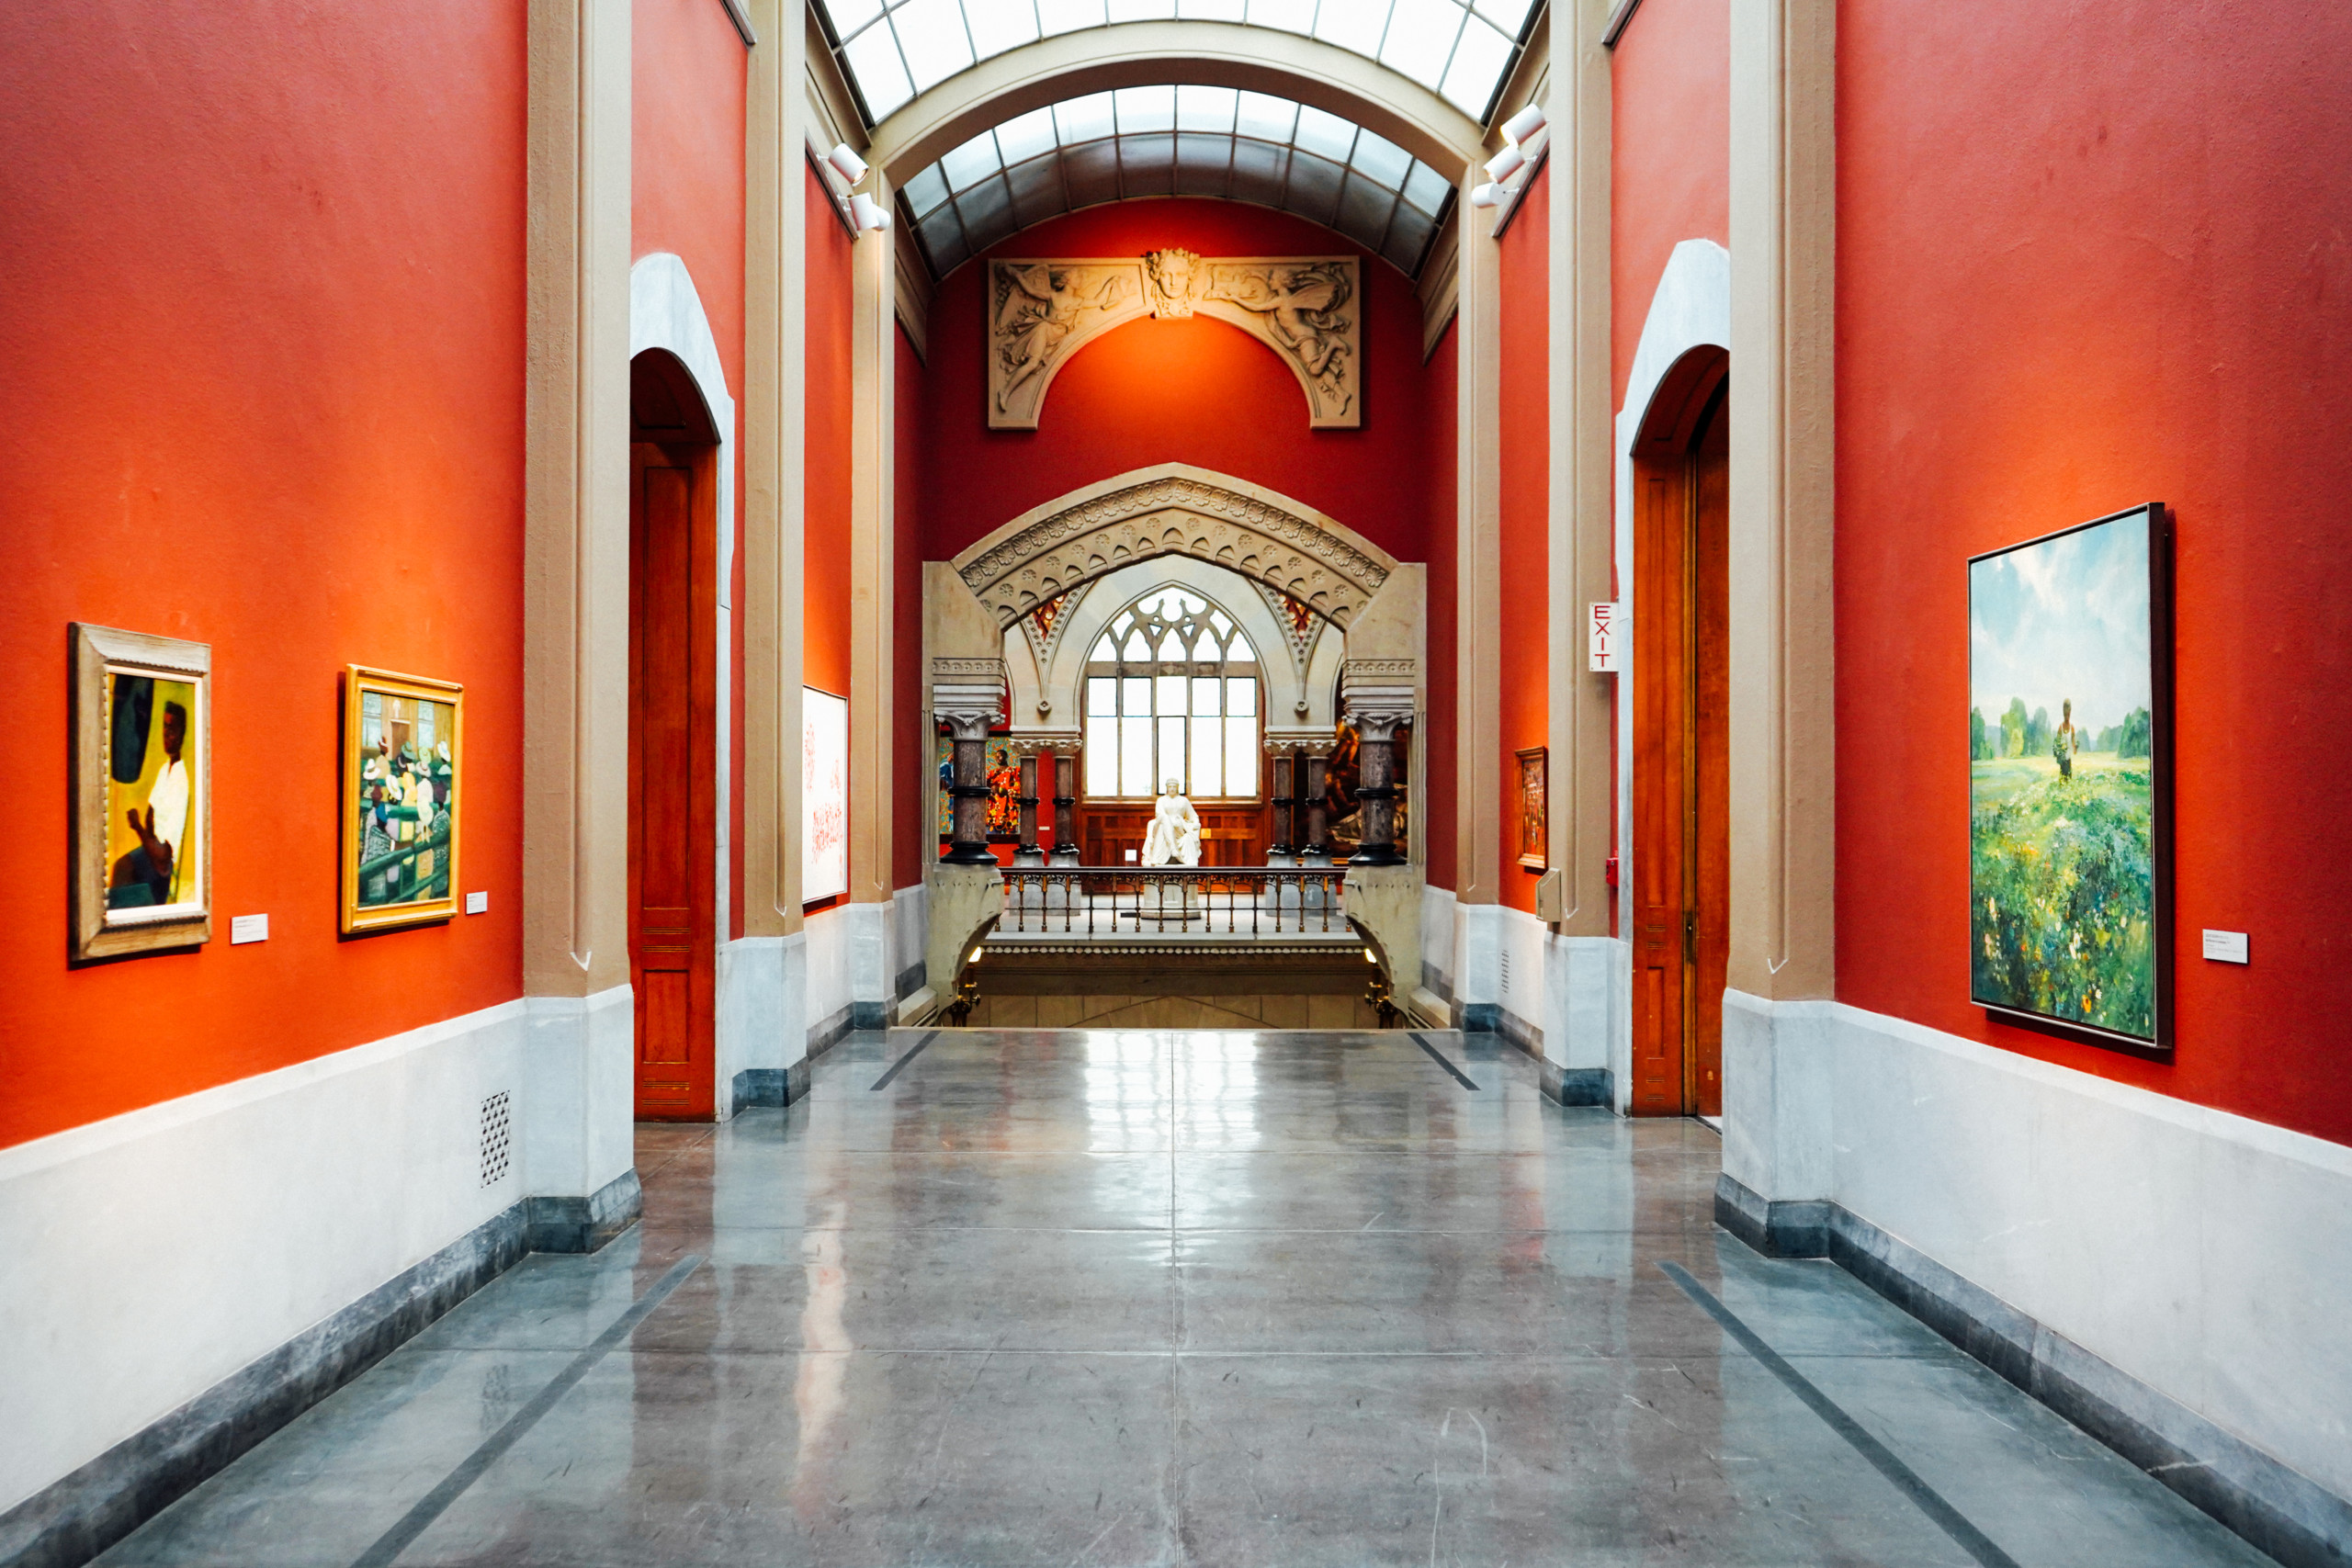 The first art museum in the United States, Pennsylvania Academy of Fine Arts celebrates classical and modern art at its best. Courtesy of the Philadelphia Convention and Visitors Bureau